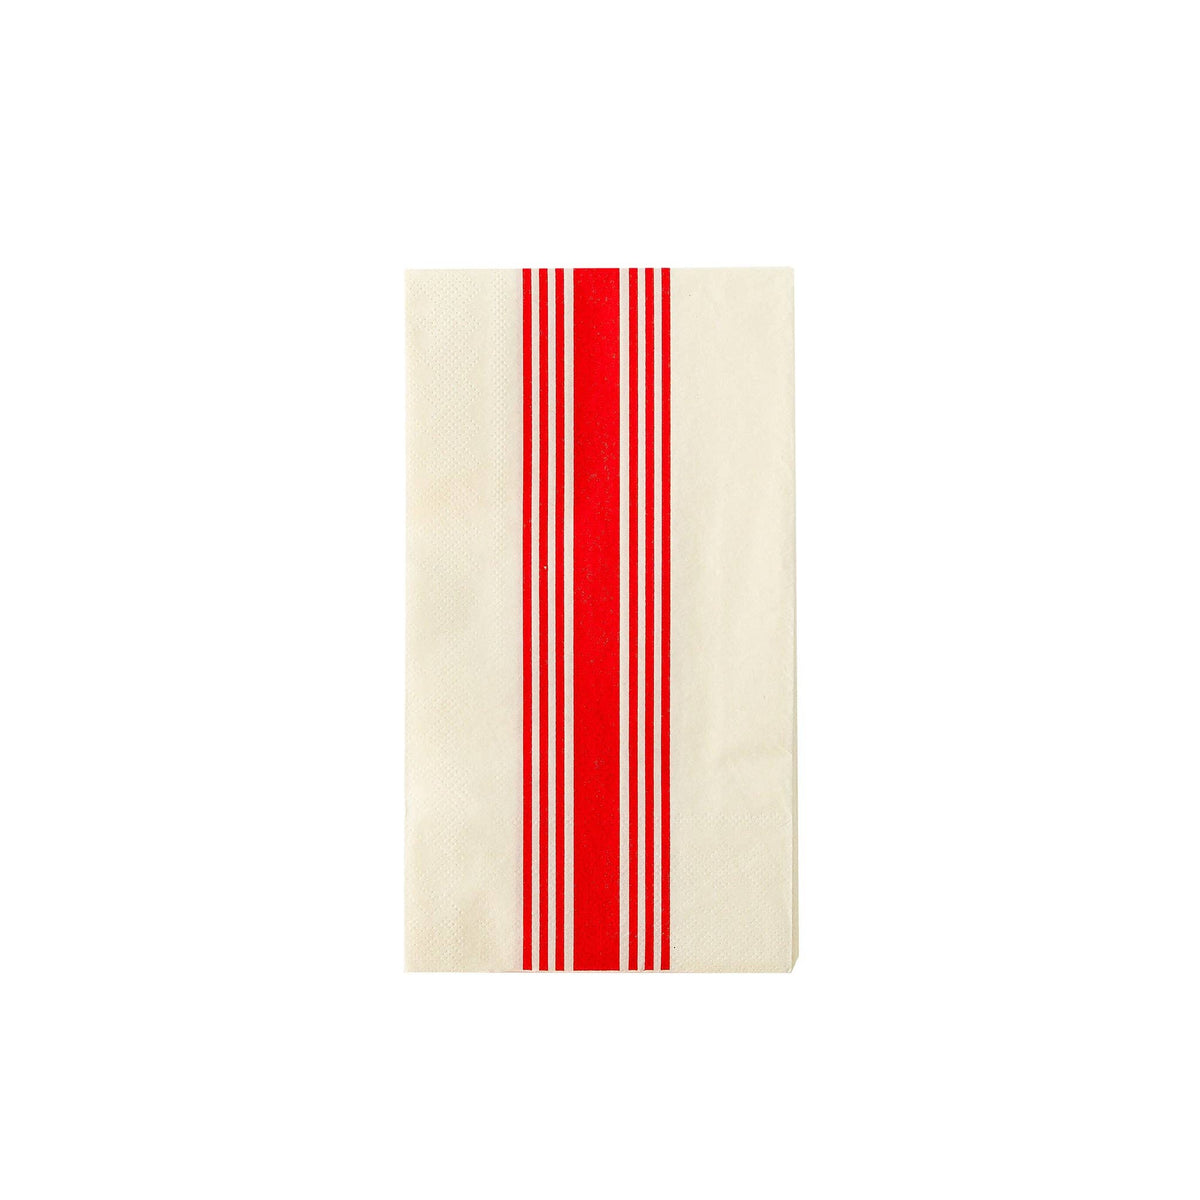 Hamptons Red Stripe Paper Guest Towel - The Preppy Bunny